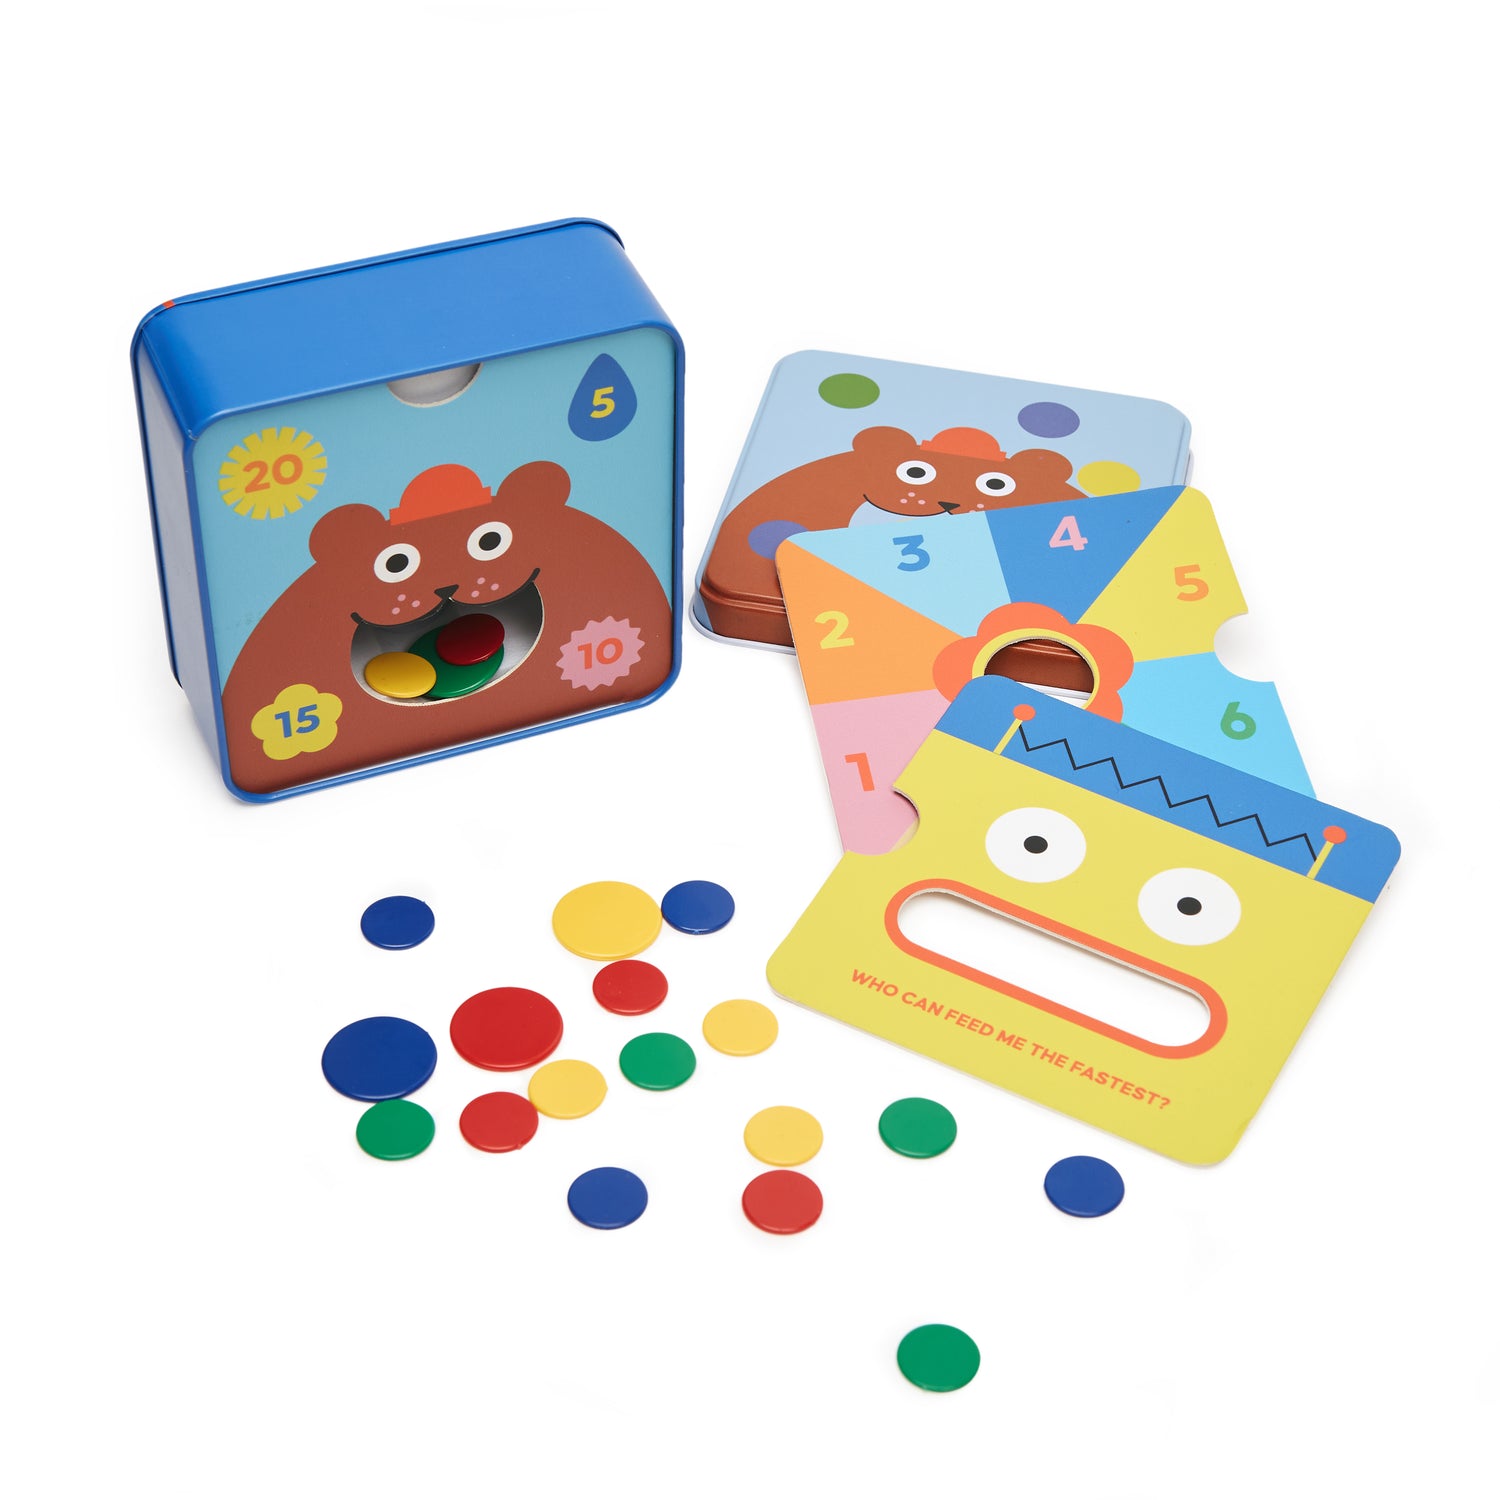 Kidoki On The Go 3 in 1 Tiddlywinks Game